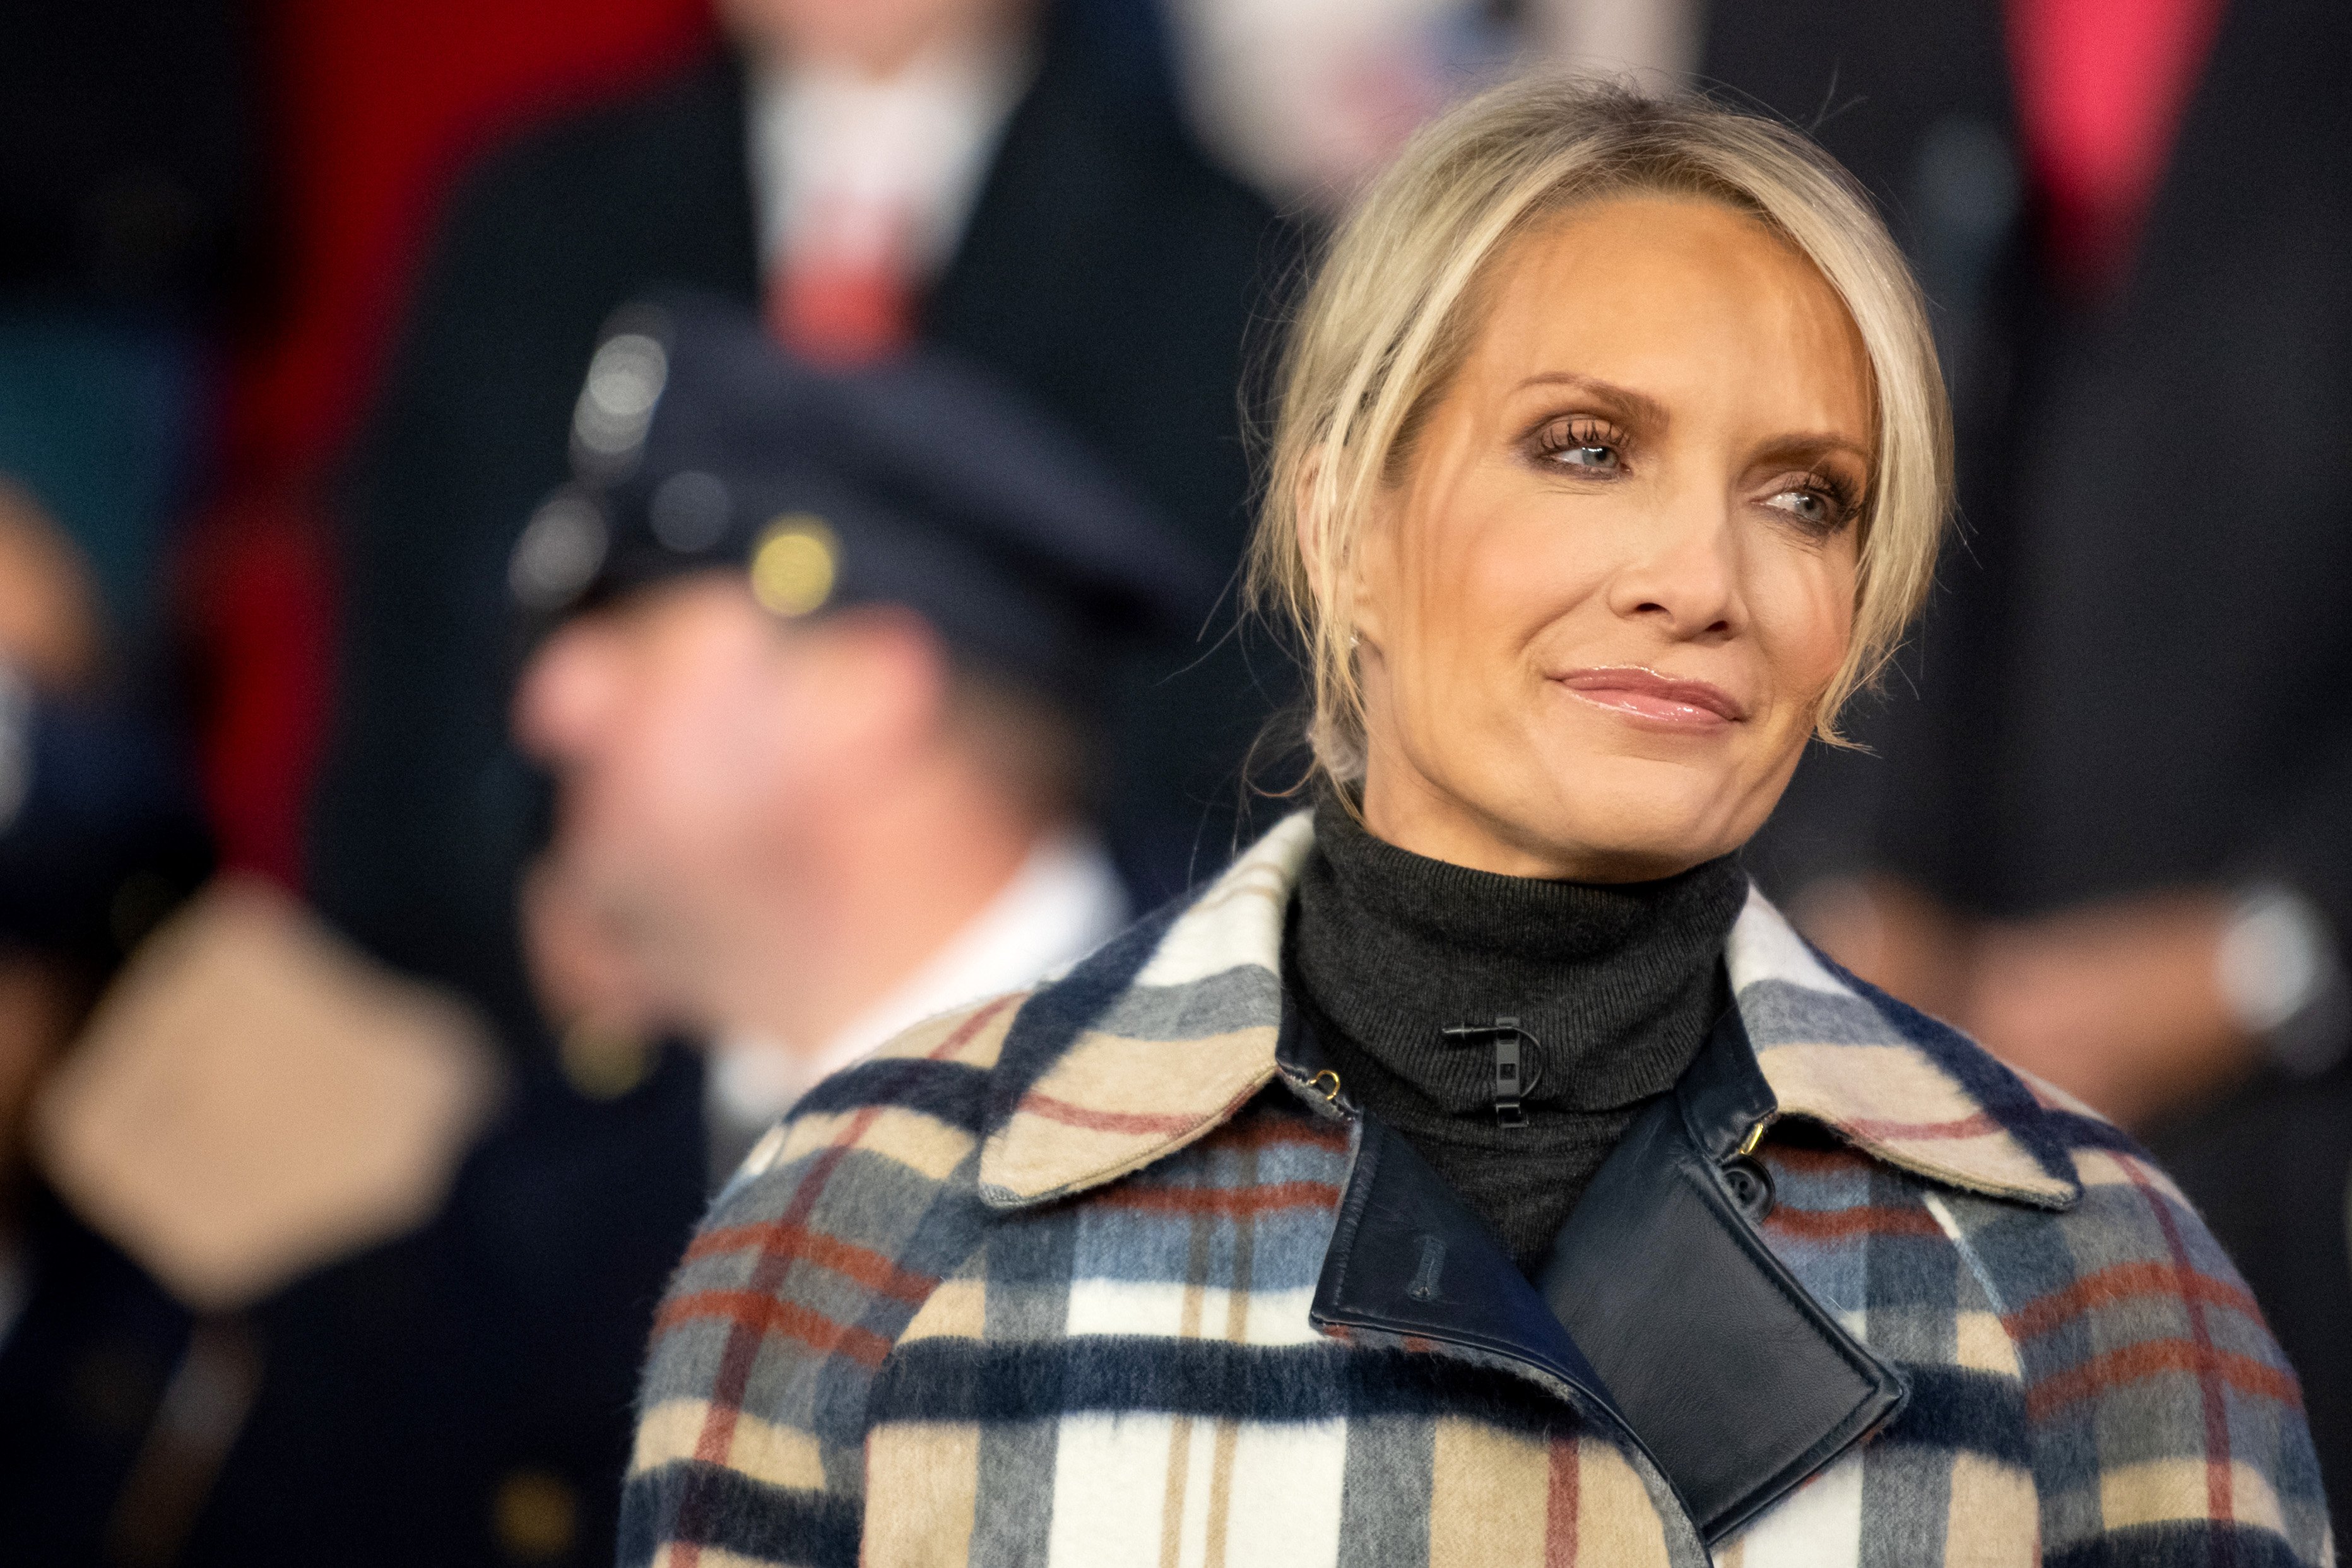 Dana Perino at the All-American Christmas Tree lighting at Fox Square on December 9, 2021 in New York City. | Source: Getty Images